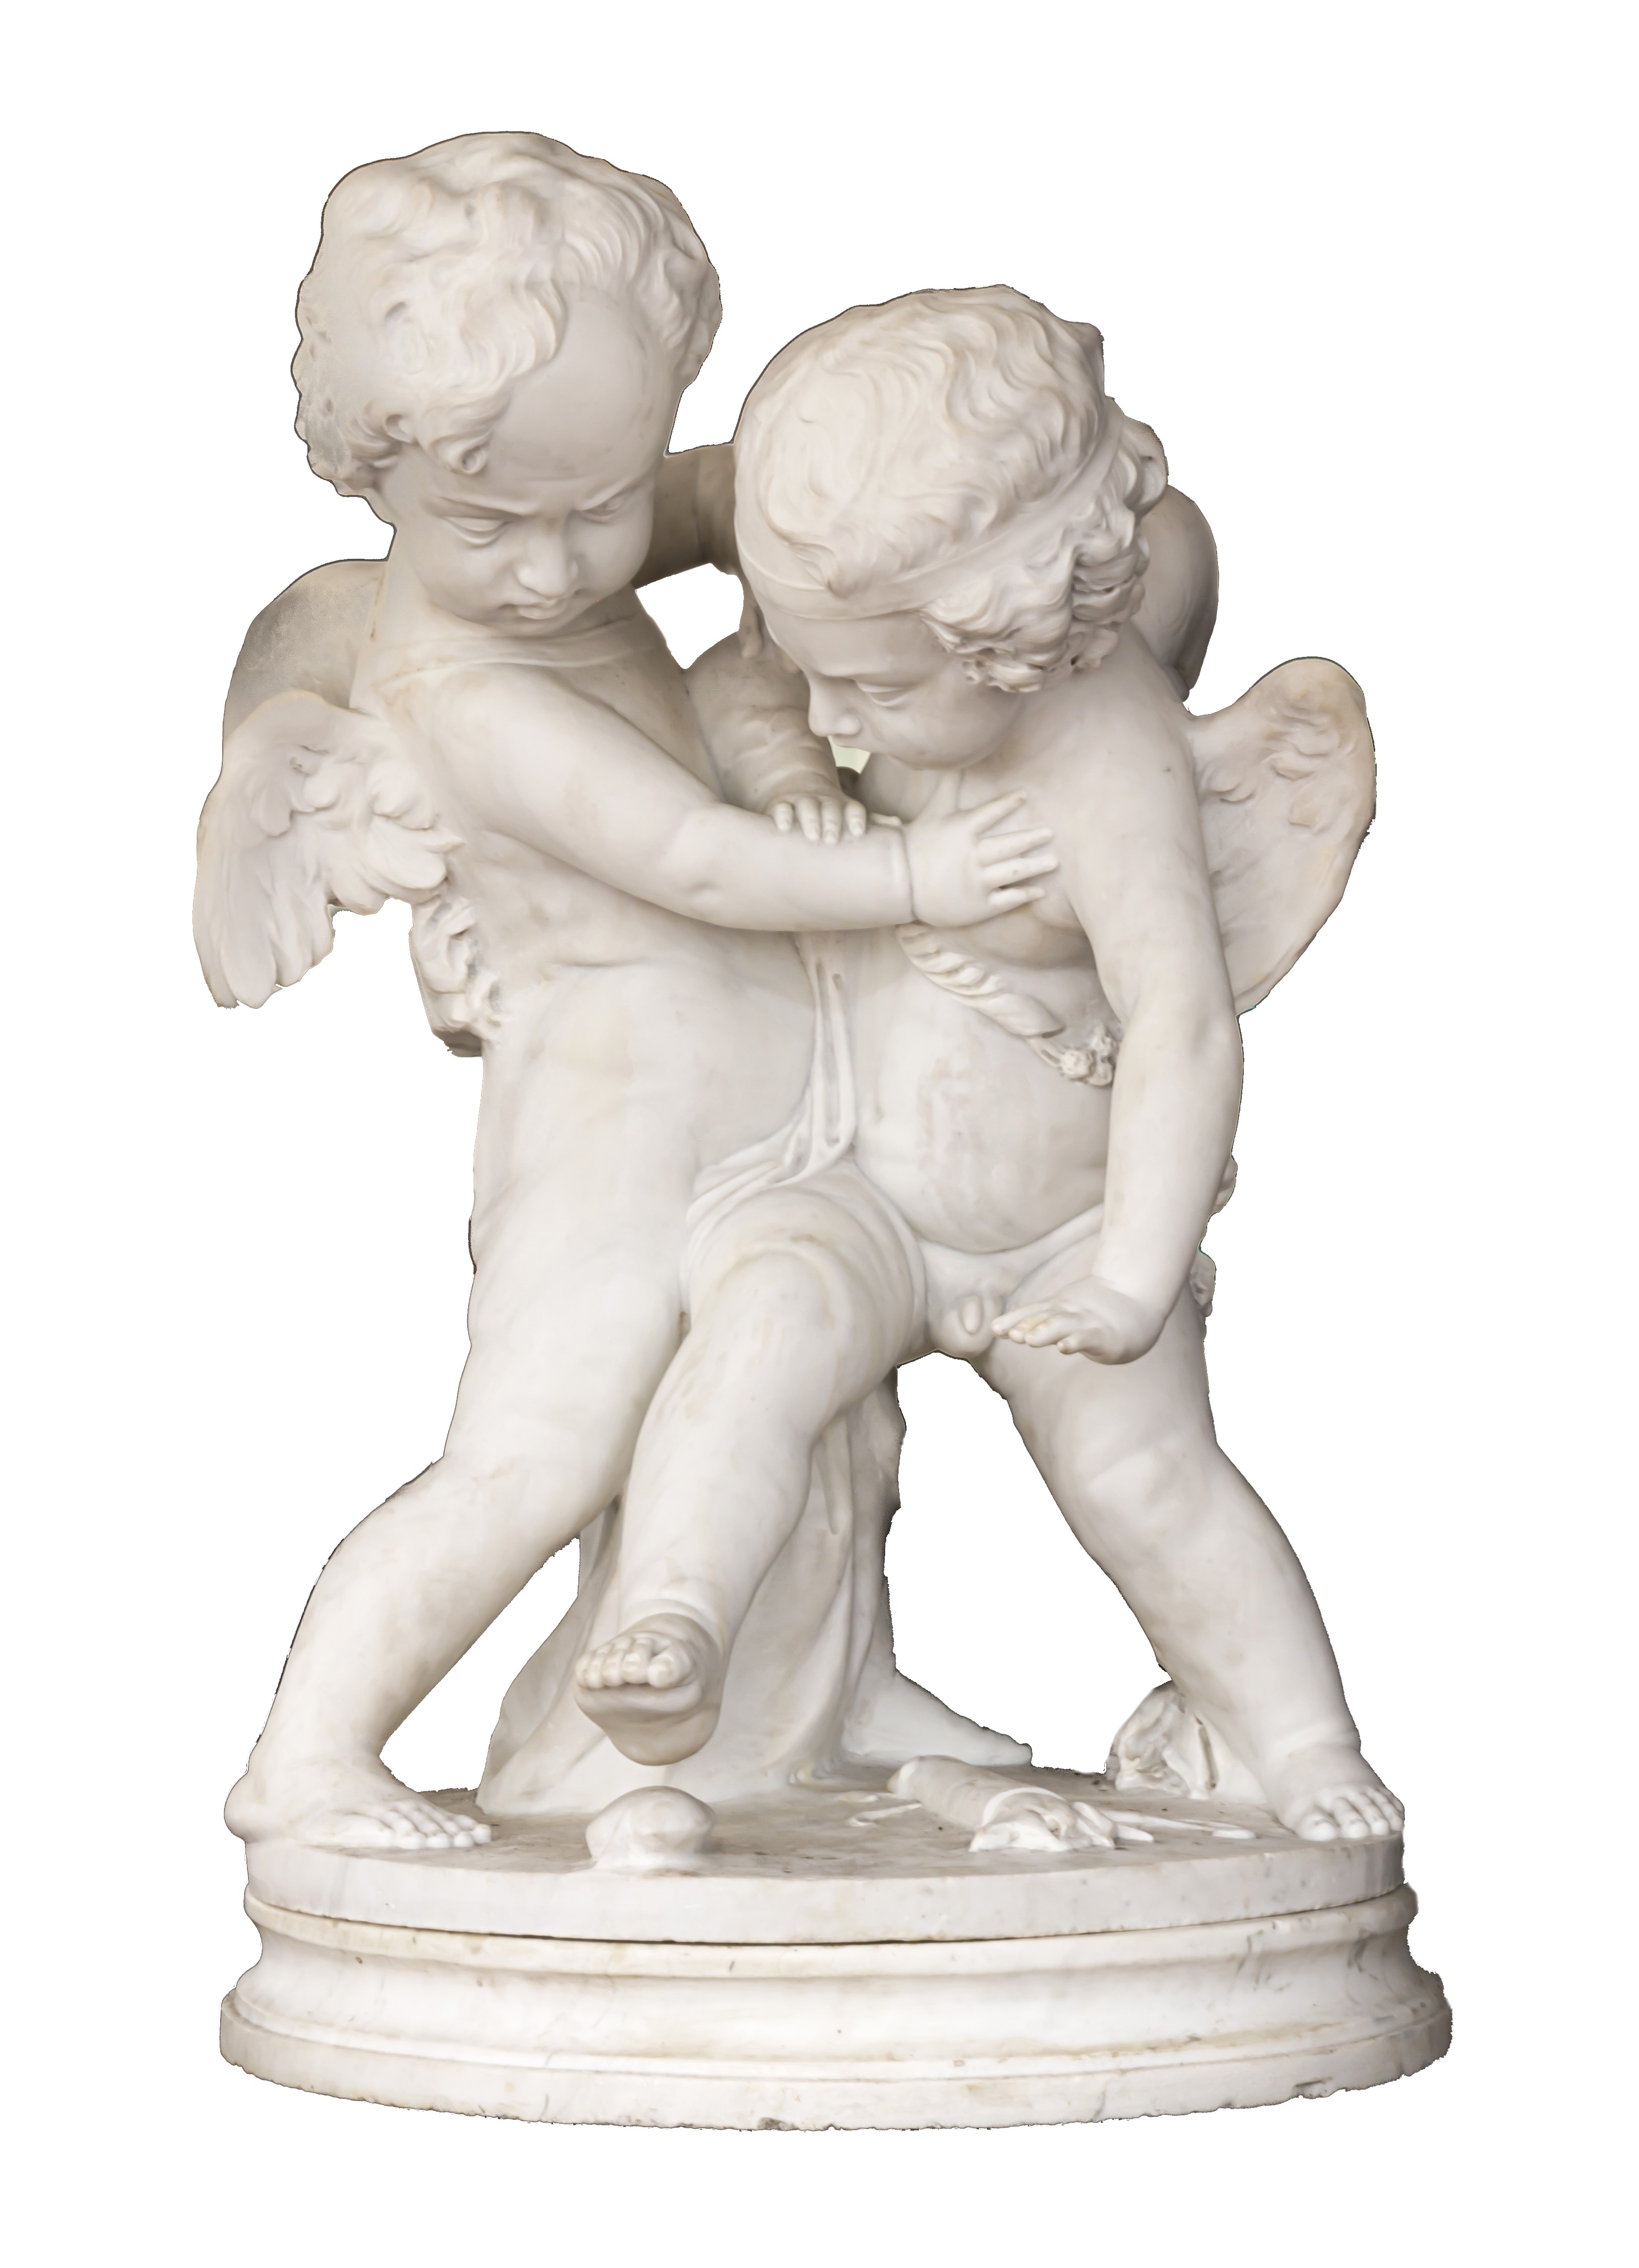 MARBLE OF EROS & ANTEROS, AFTER